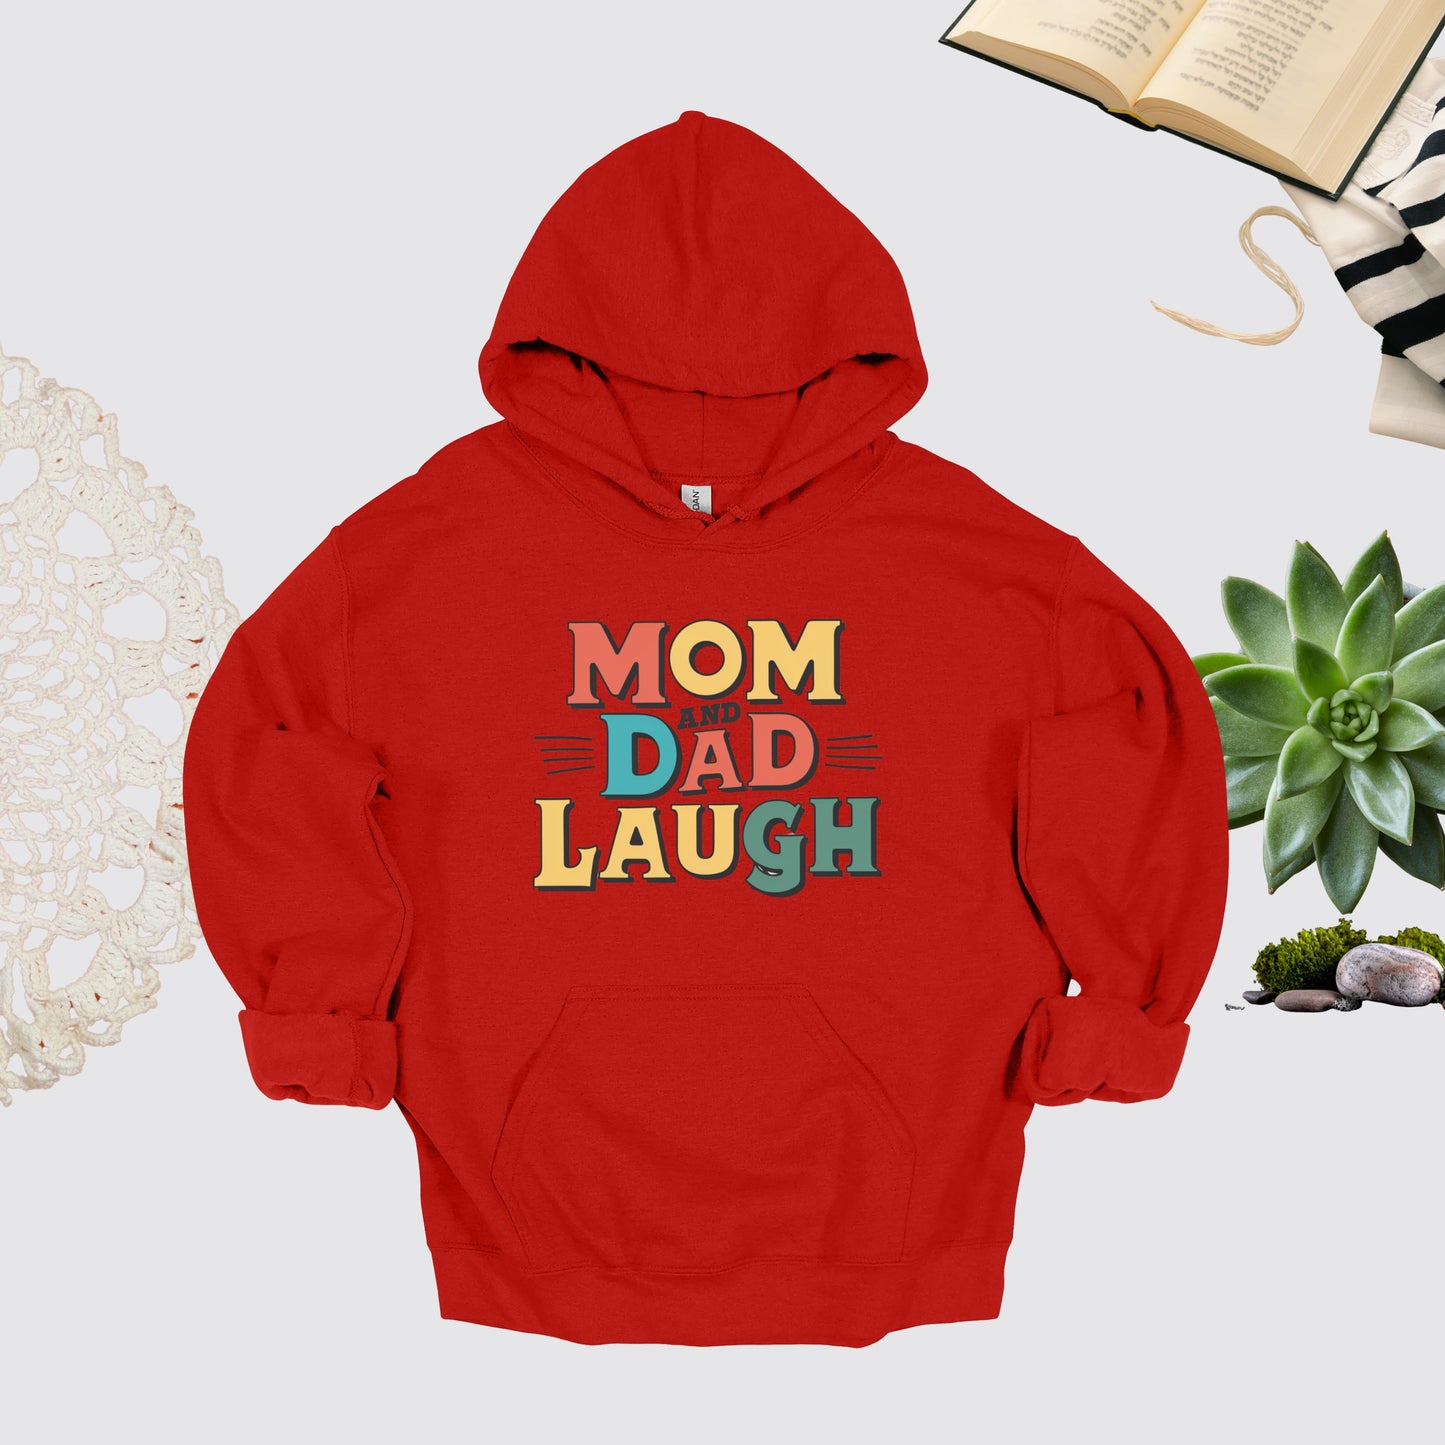 Mom and Dad Red Hoodie